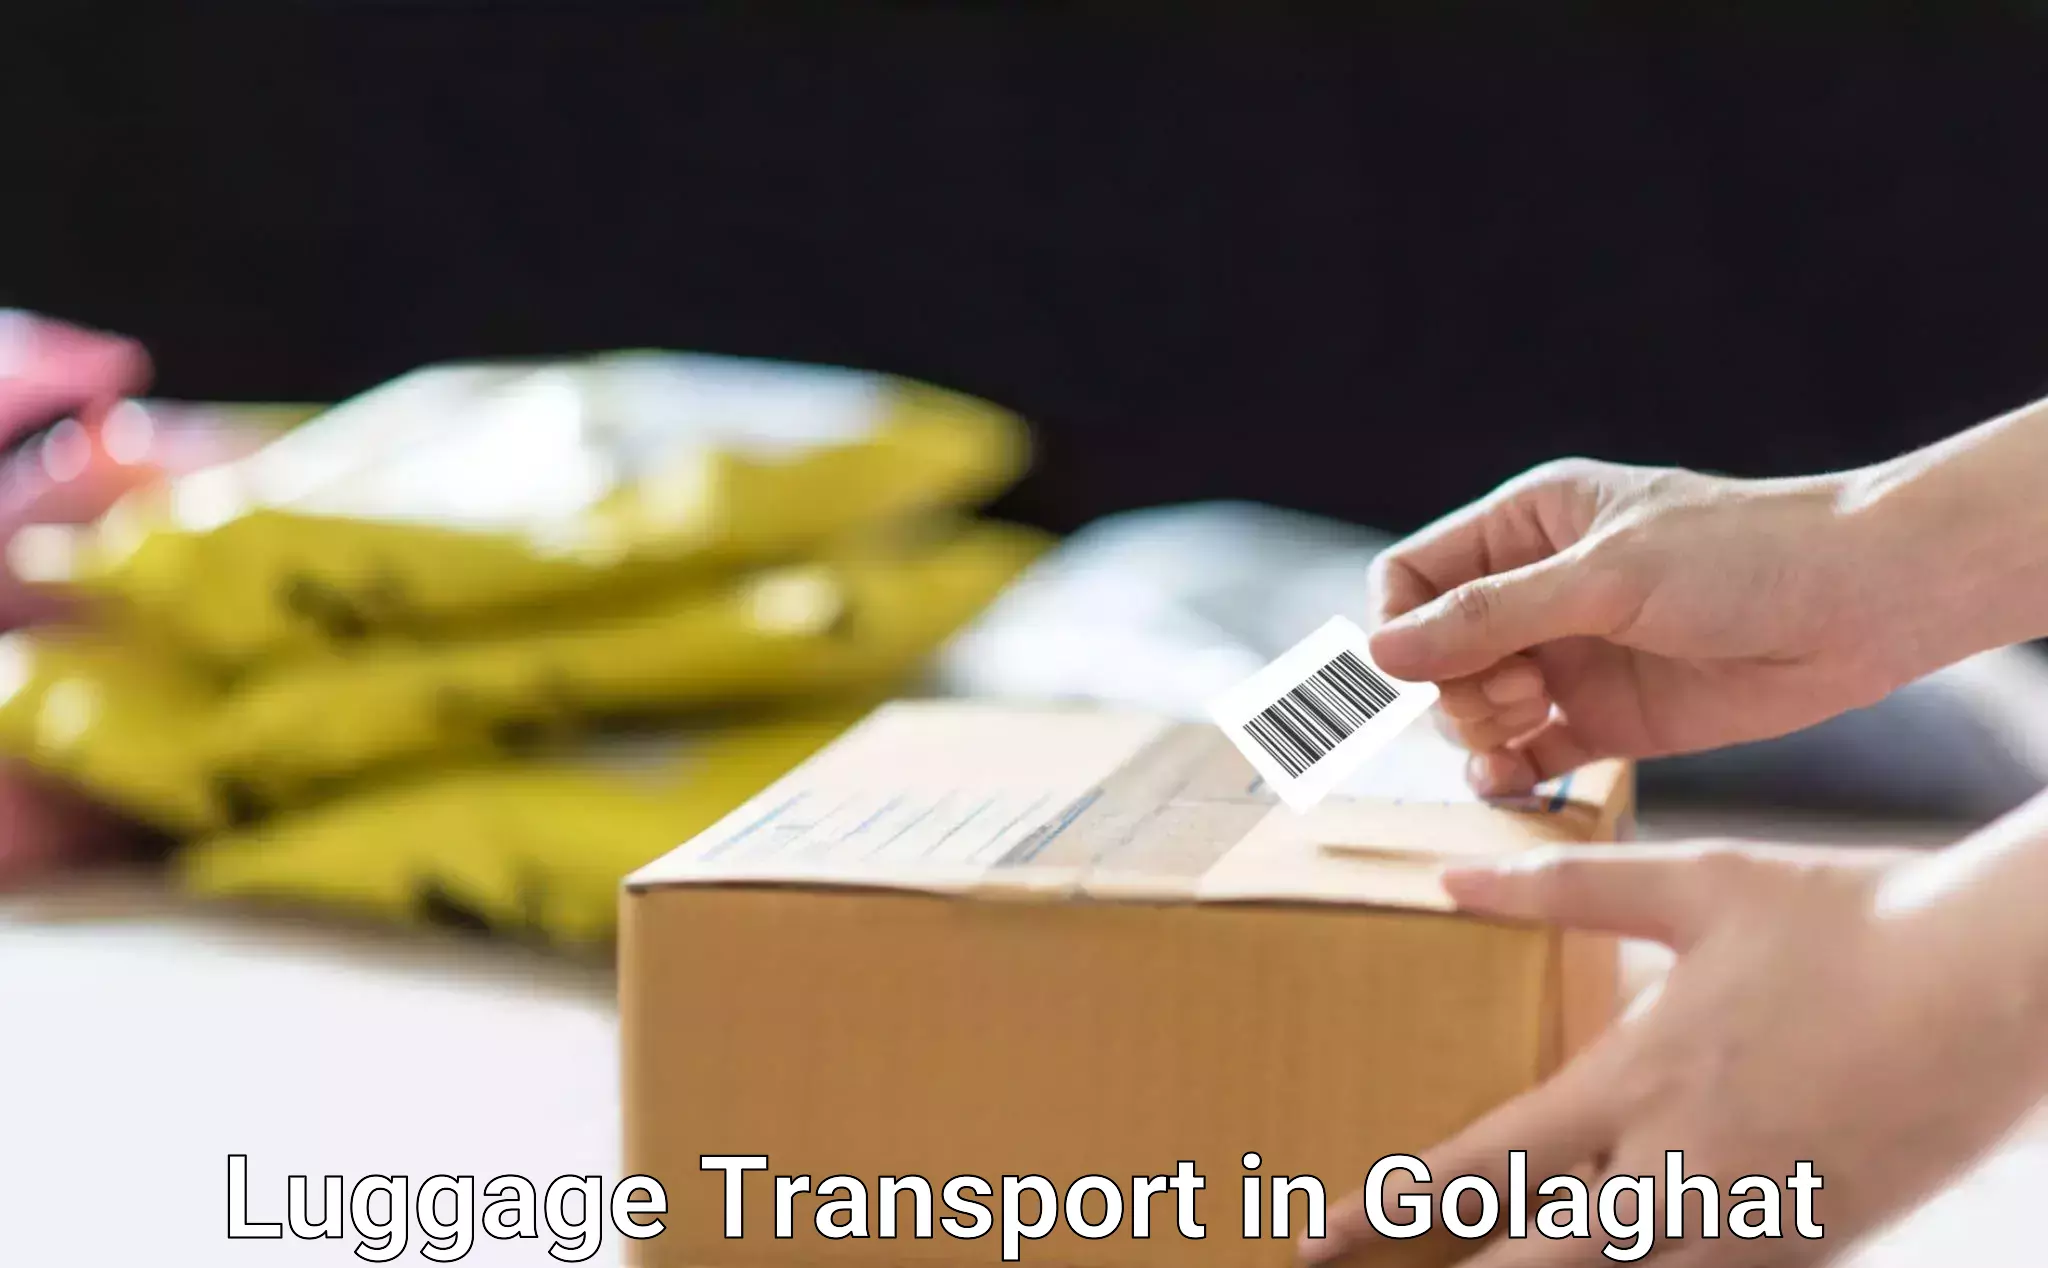 Luggage transport logistics in Golaghat